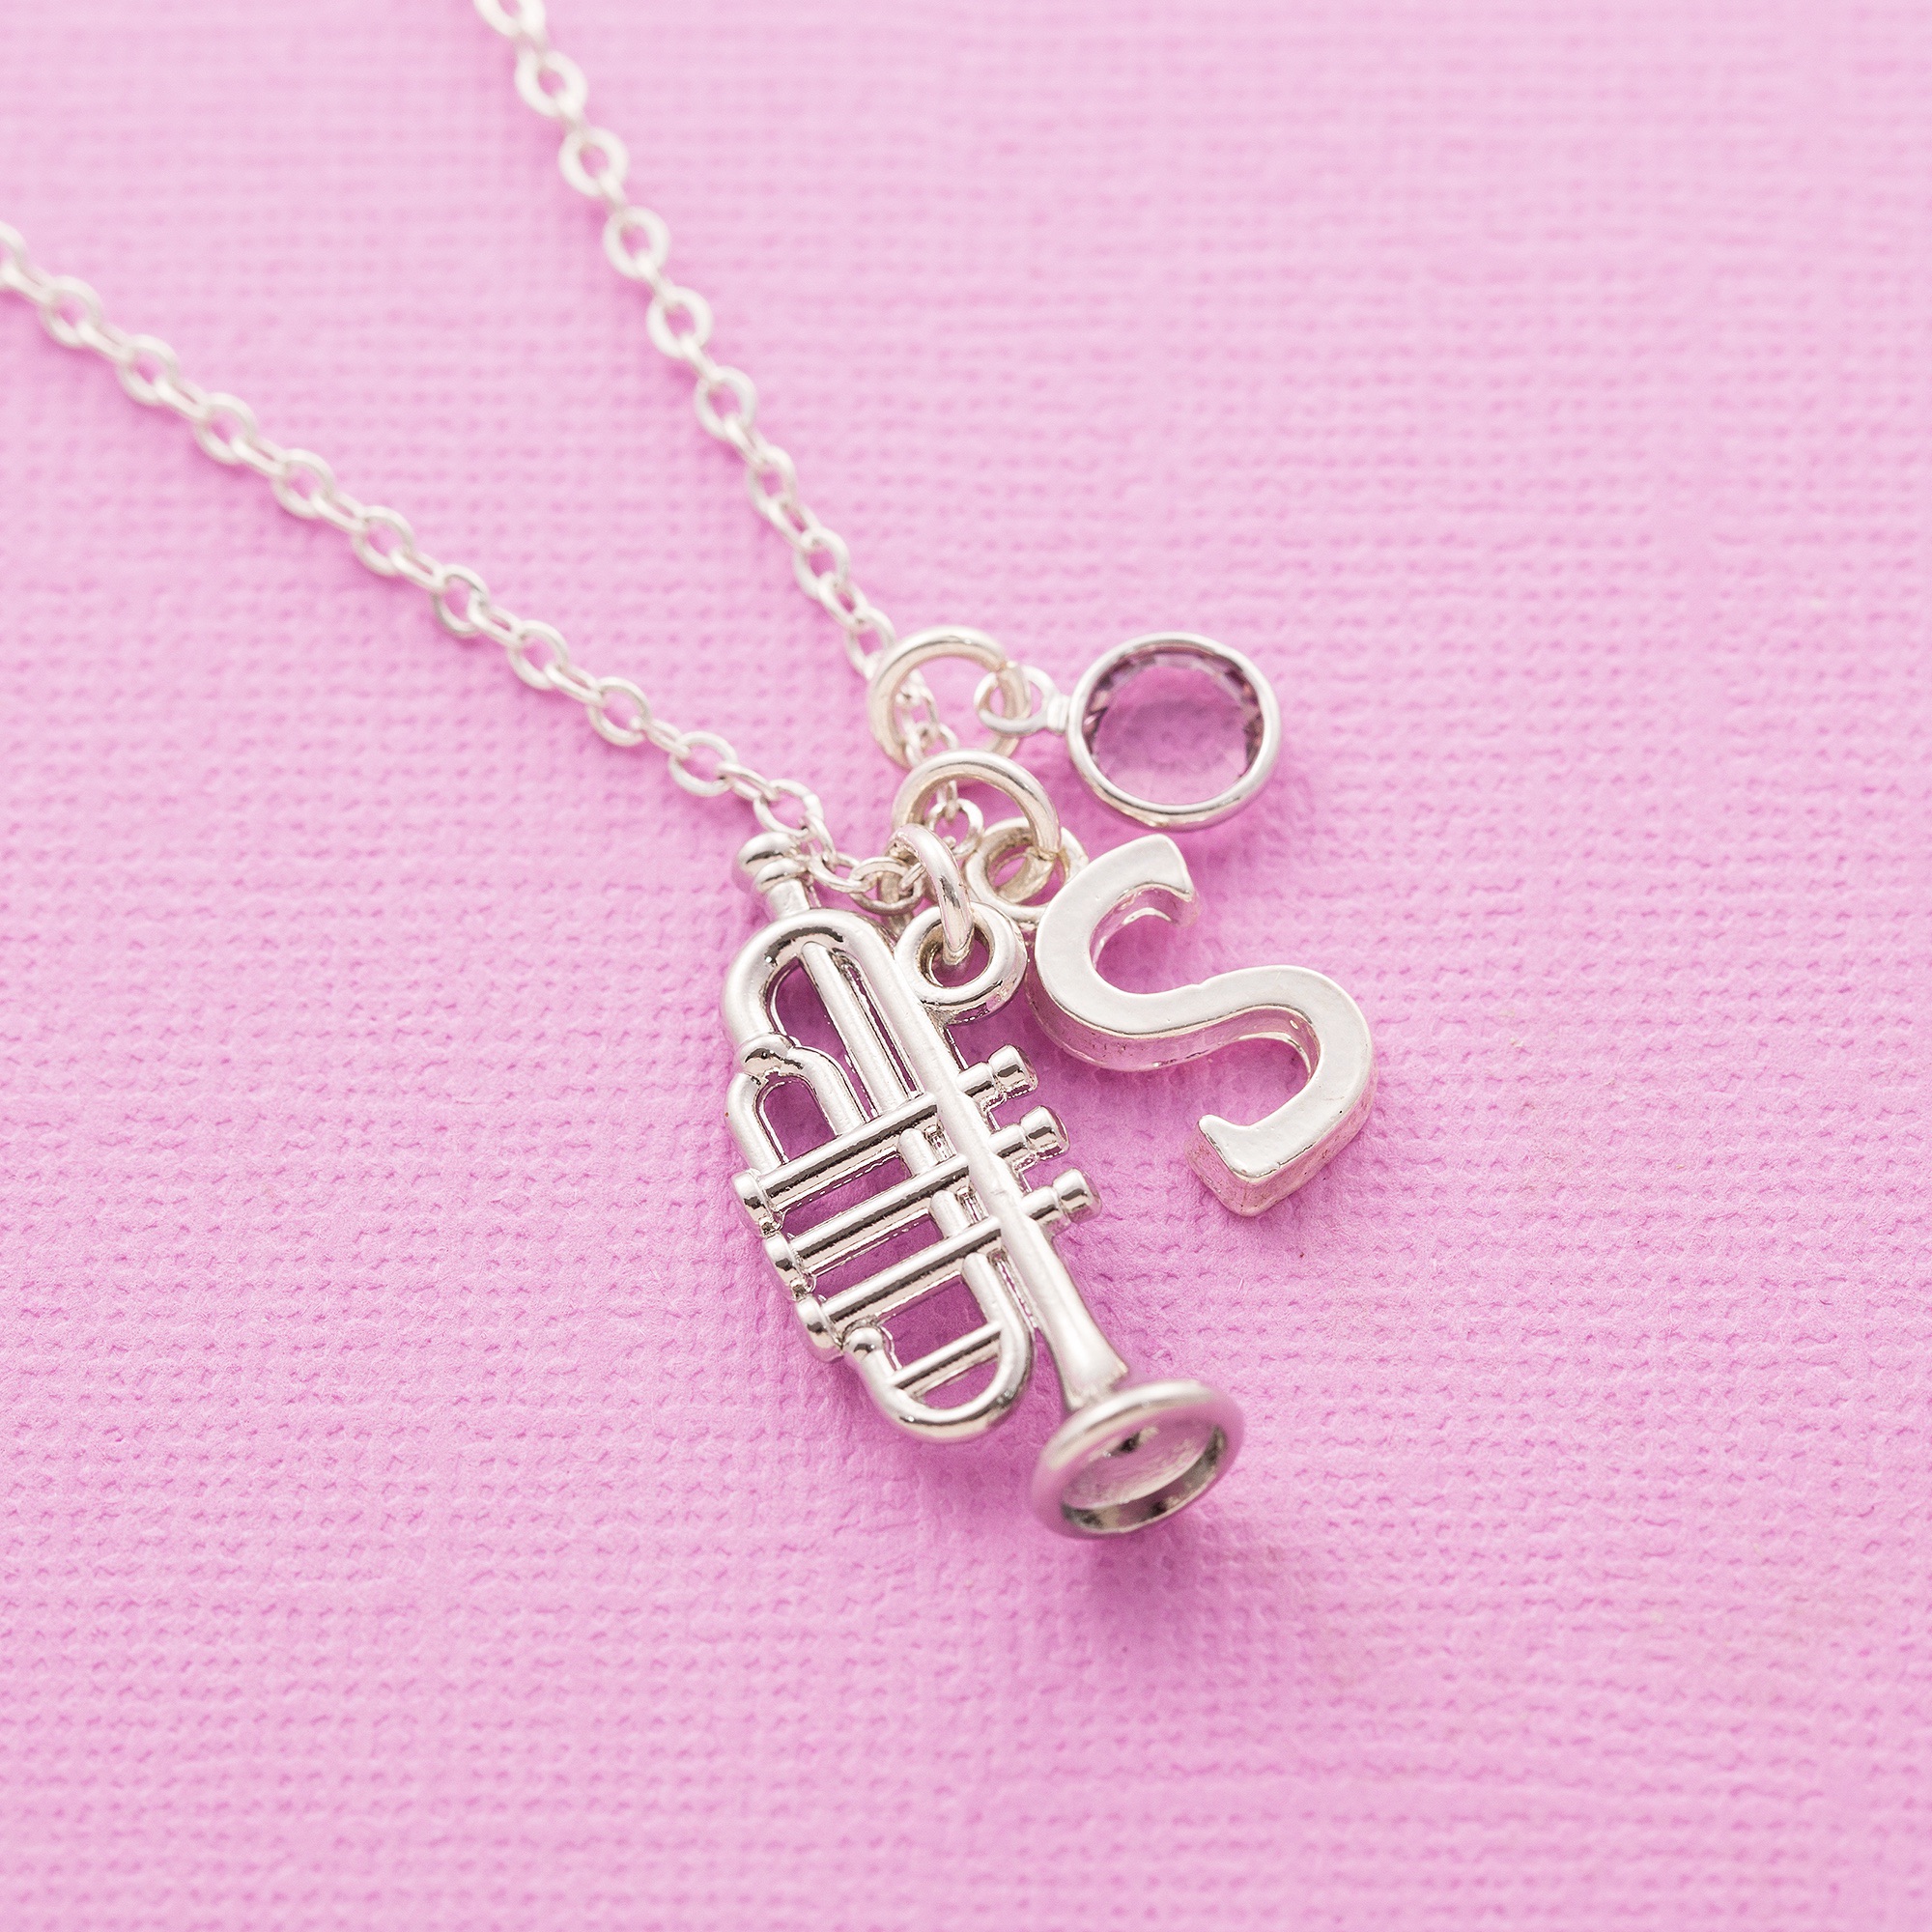 Trumpet Necklace with Personalized Initial Trumpet Initial Necklace, Trumpet Charm Necklace and Custom Bead Silver Trumpet Charm